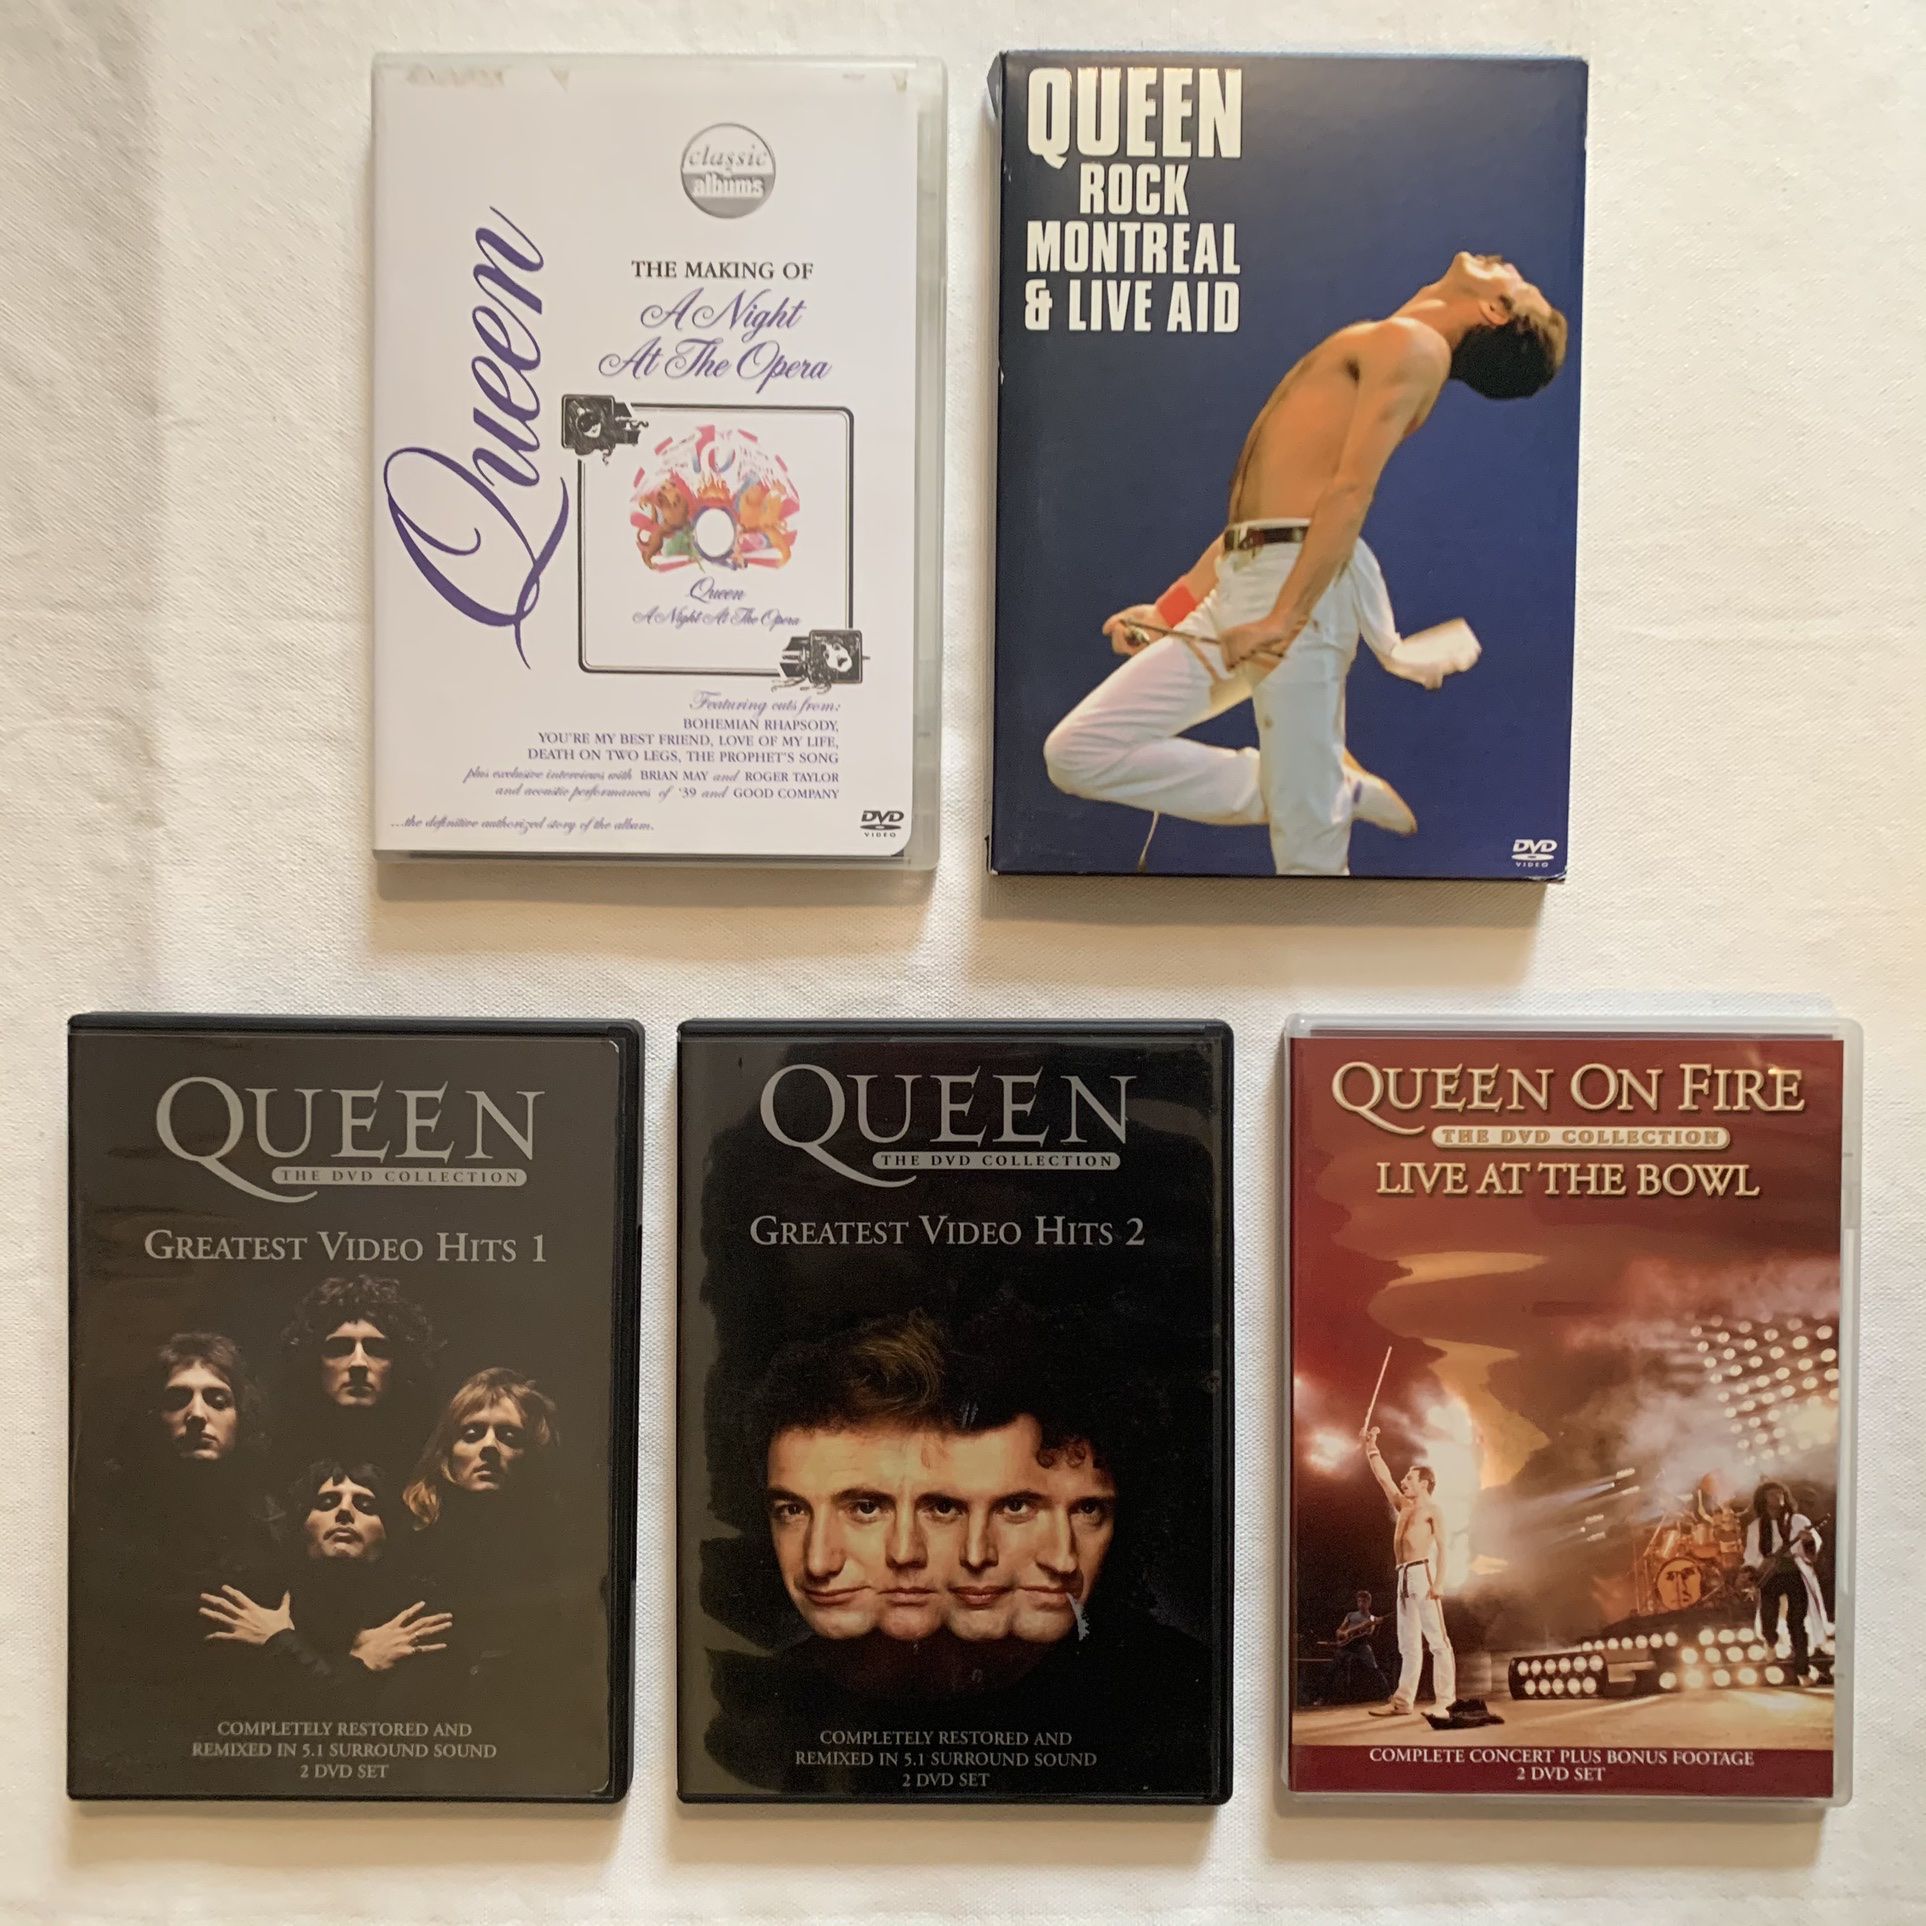 QUEEN Concert DVD Documentary Music video Collection Set